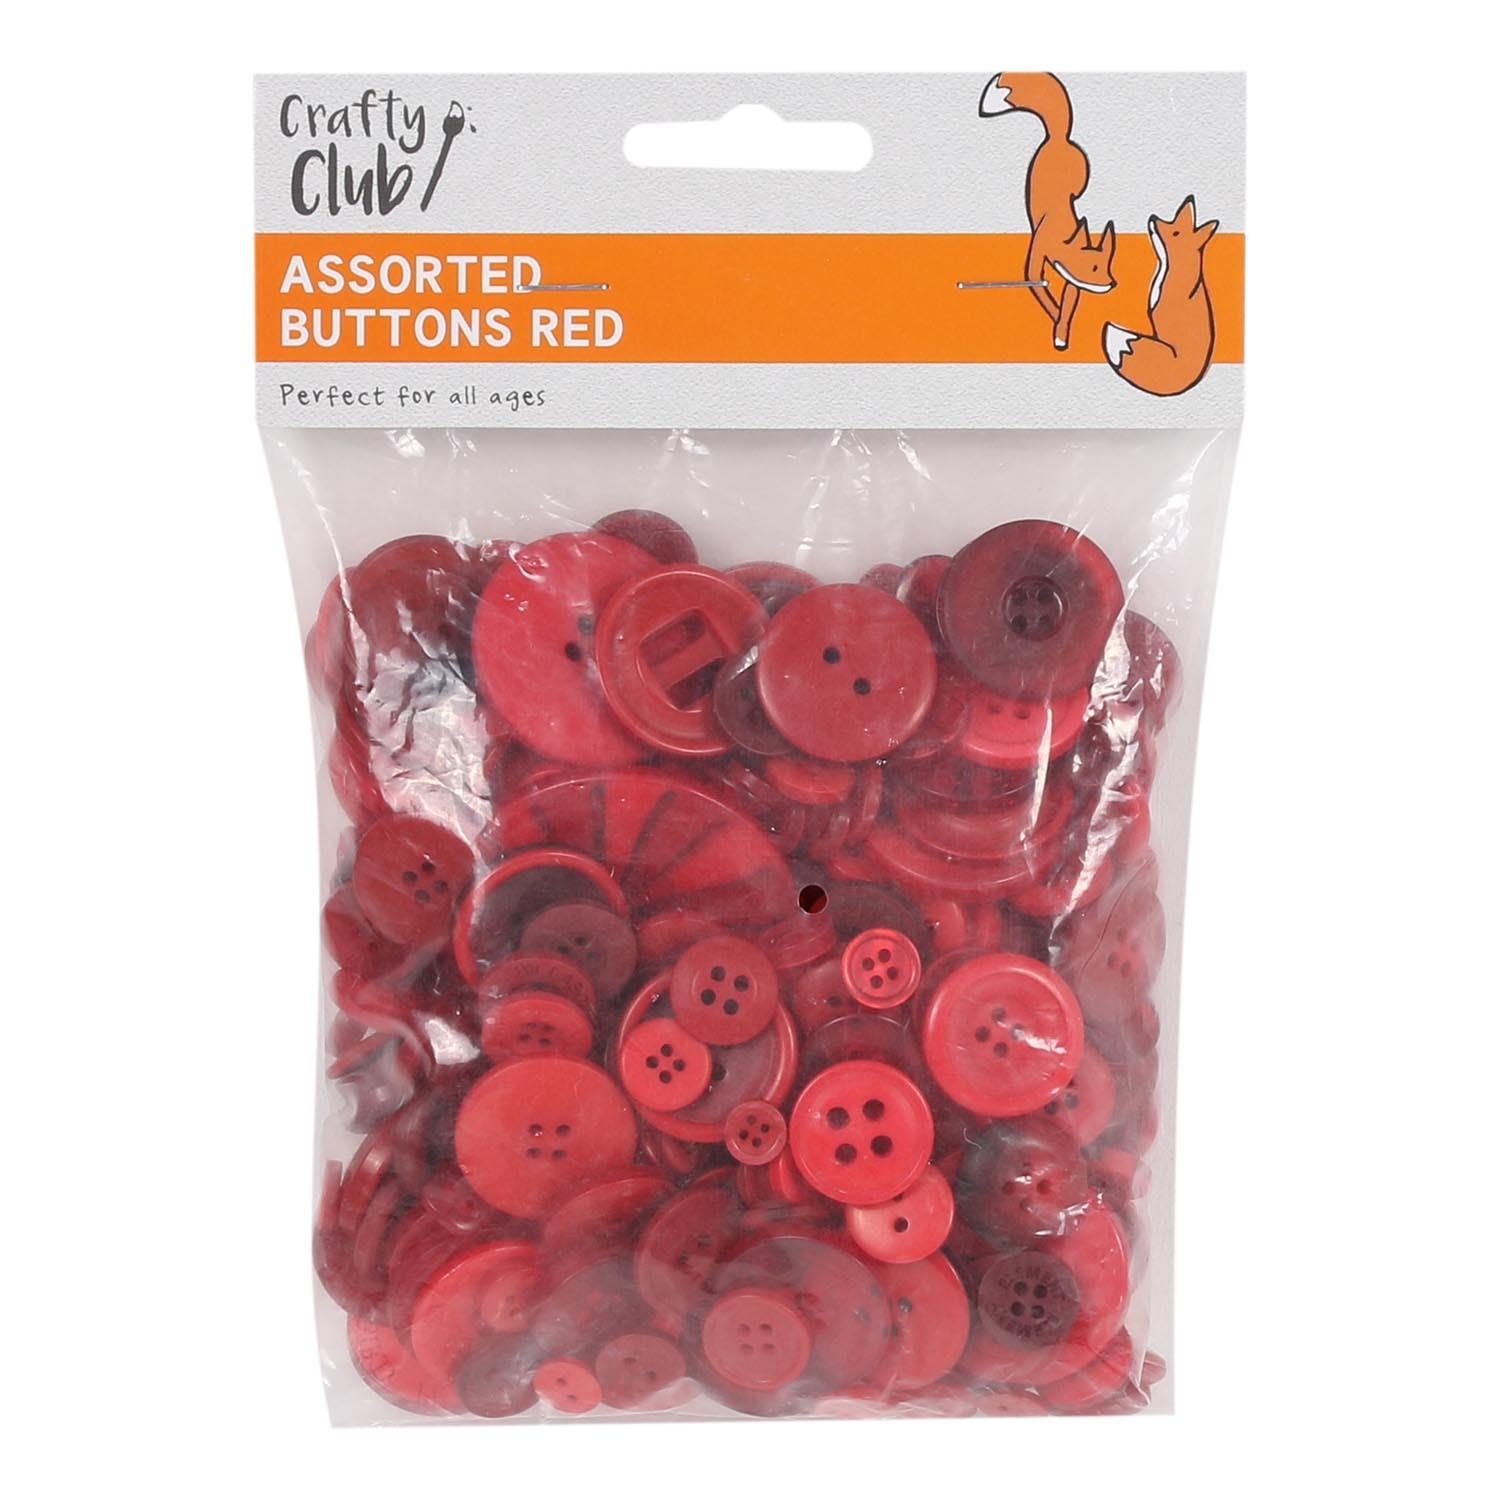 Crafty Club Assorted Buttons - Red Image